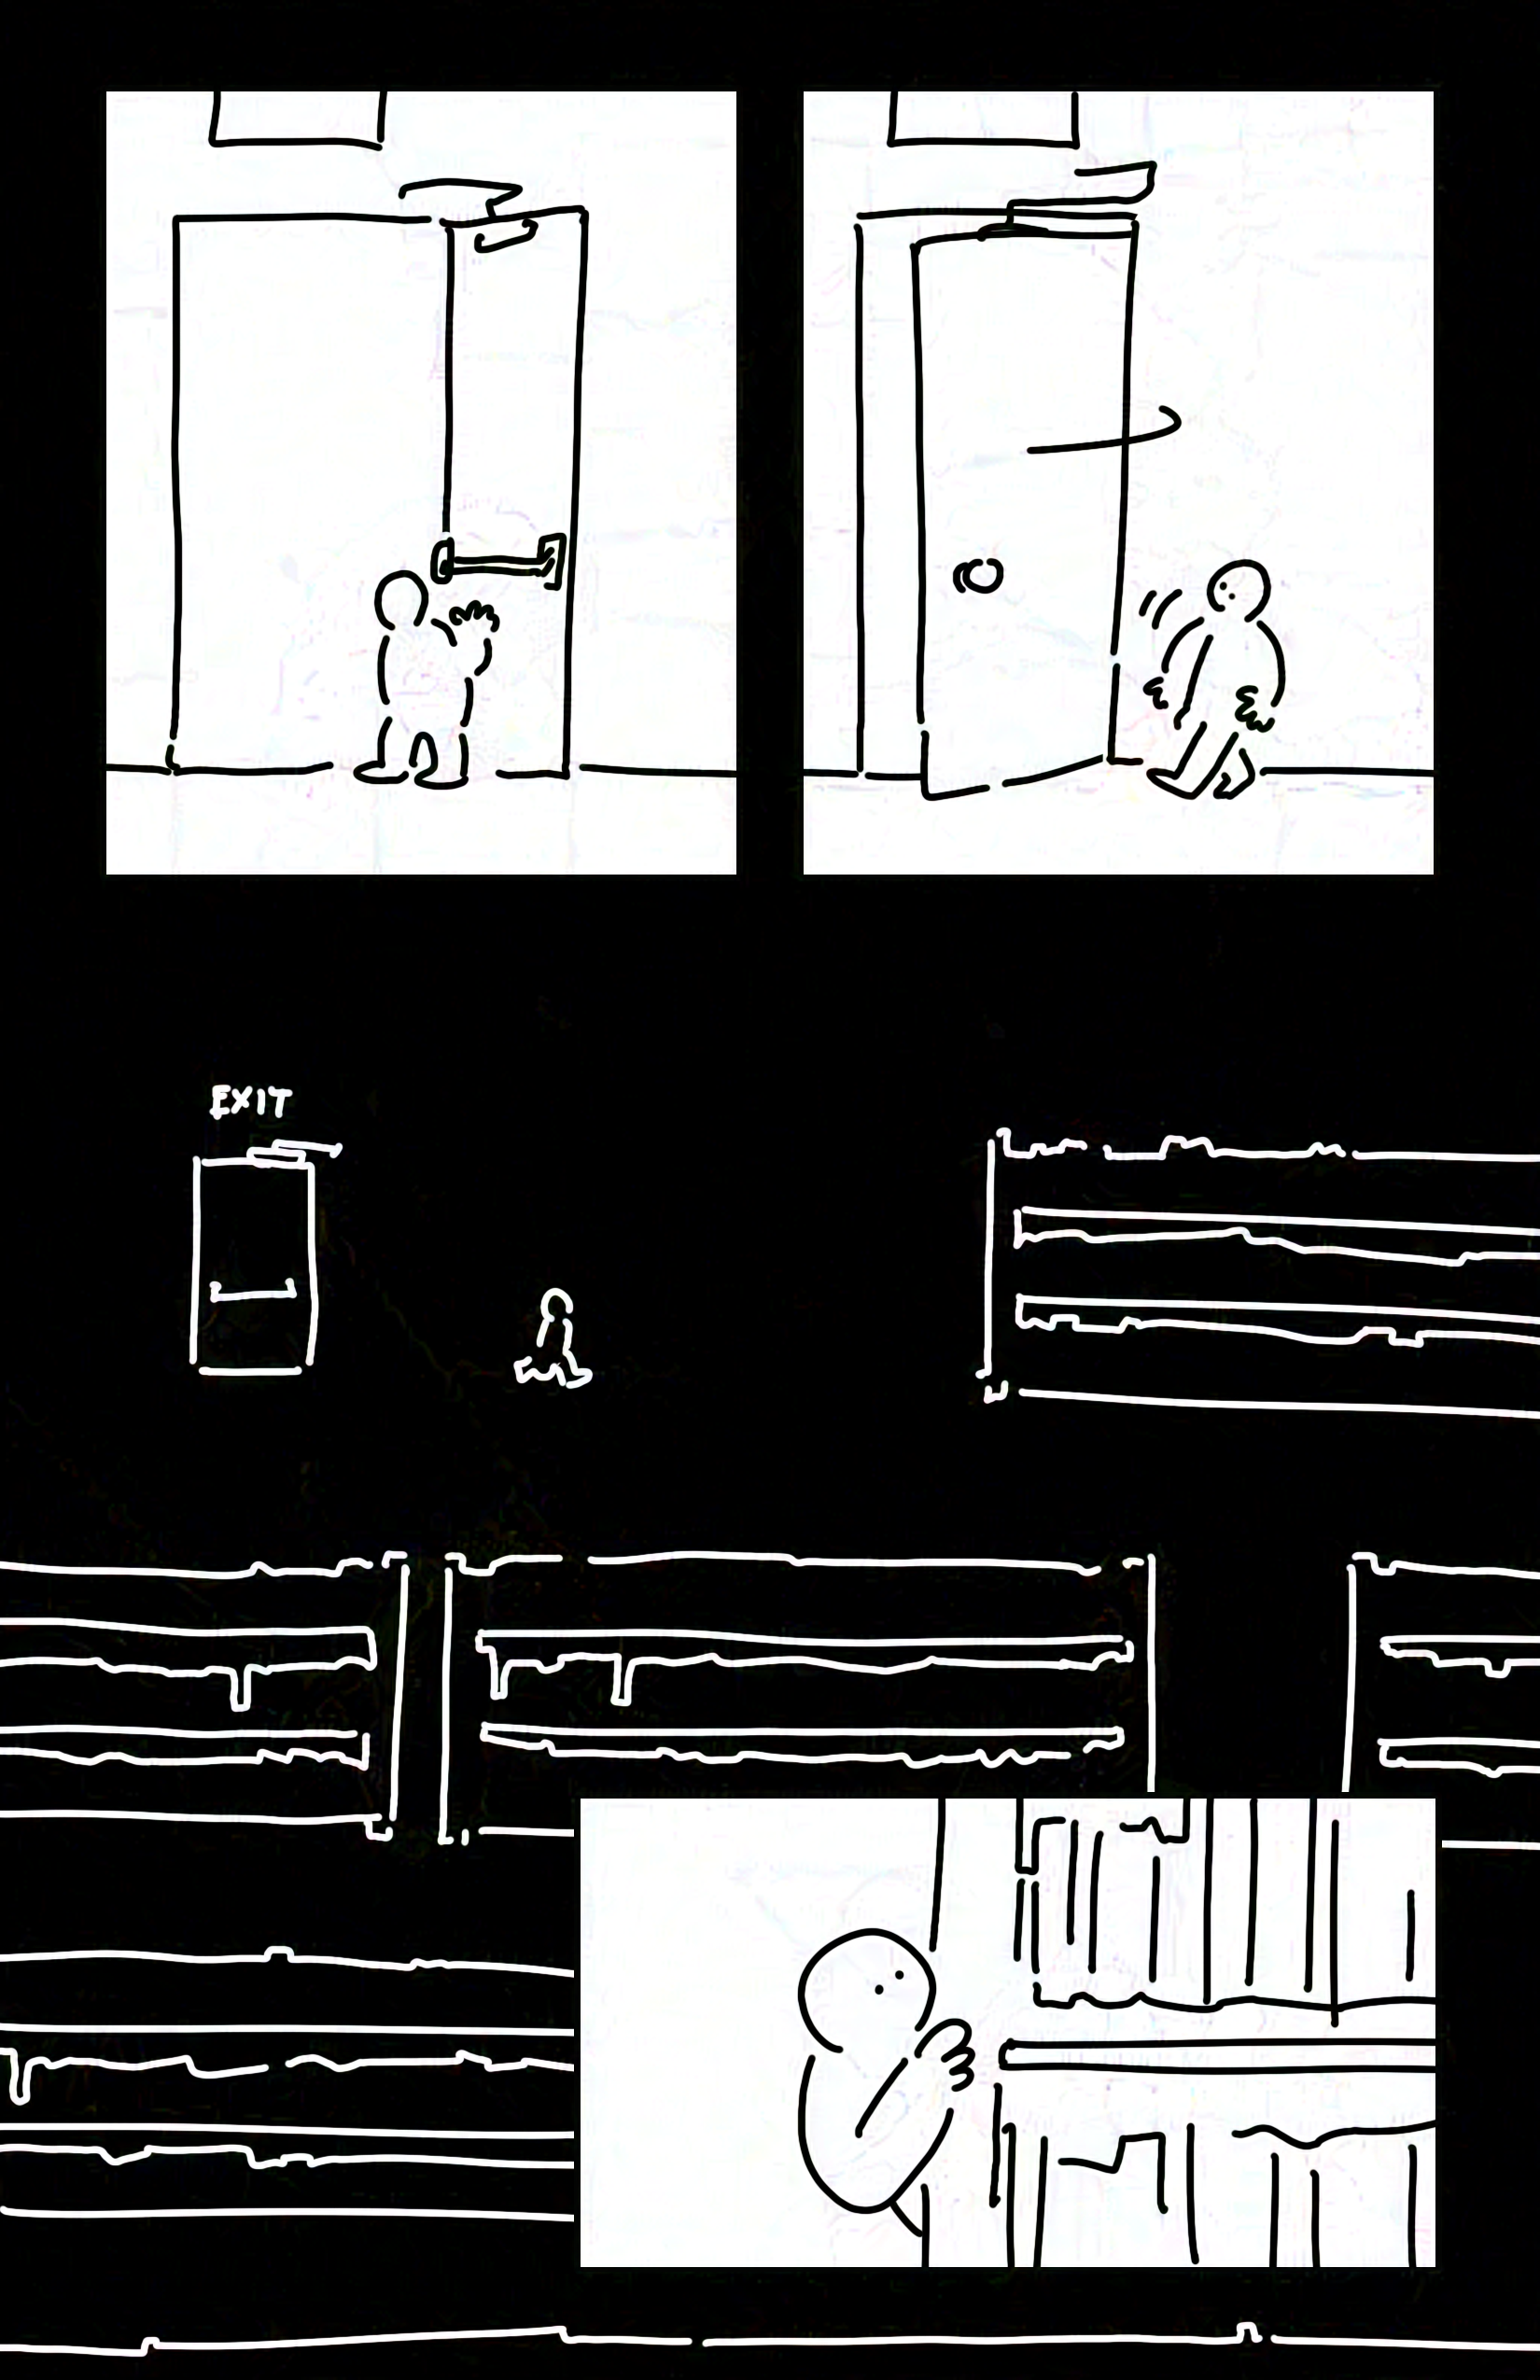 Panel 1: Kid on the right looking out the door, point of view is behind them and inside the building.
Panel 2: The door swings shut as the kid backs away.
Panel 3: White line art on black background, the kid walks back towards the rows of bookshelves and away from the closed door with the exit sign on top.
Panel 4: The kid peeking around a bookshelf.